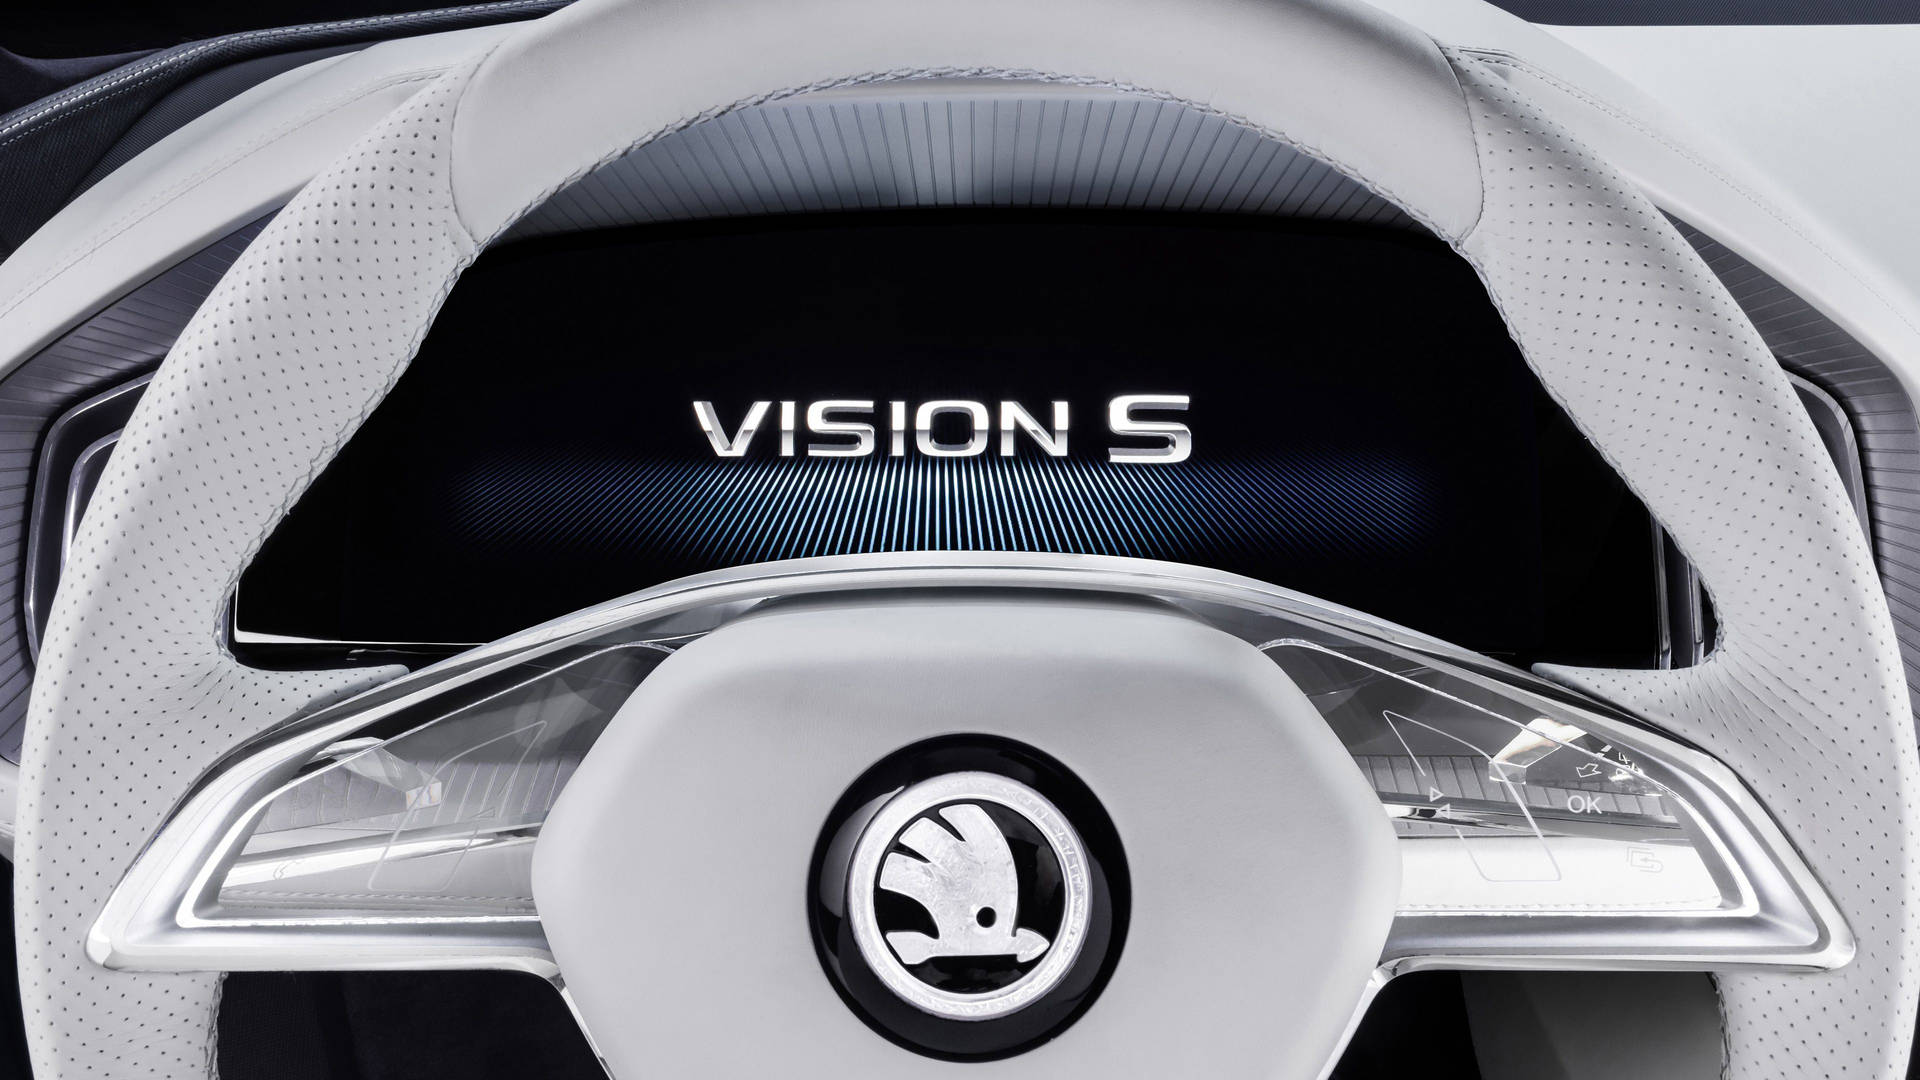 Drive in Style with the Skoda Vision S Logo Wallpaper